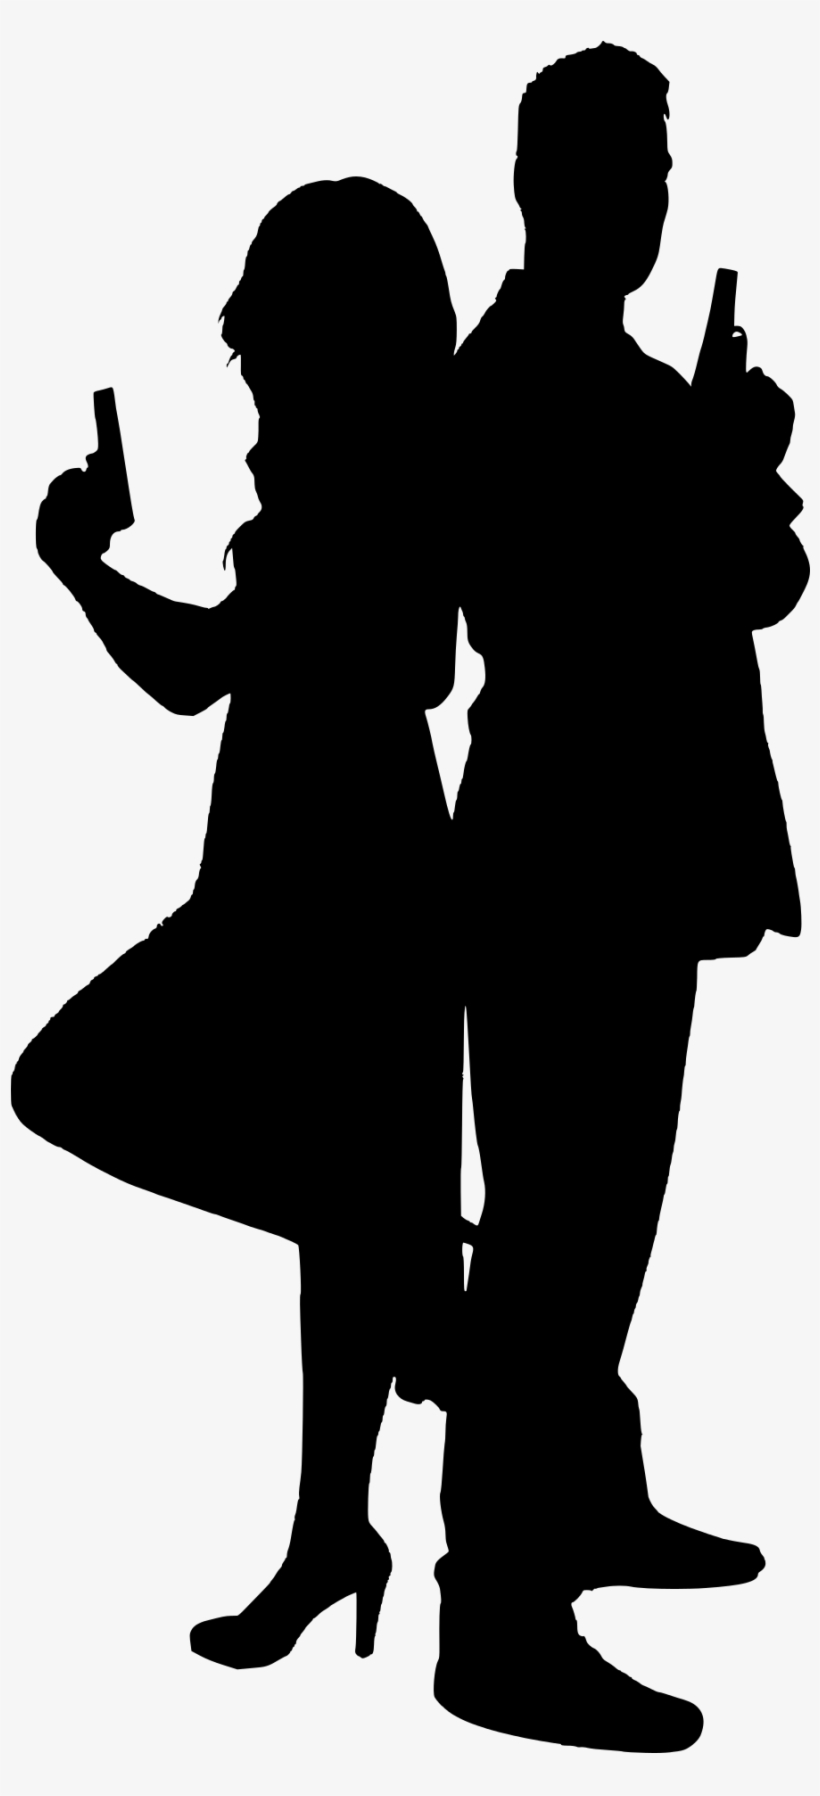 Of This Critically Divisive Feature In The Long-running - Spy Silhouette Png, transparent png #4327667